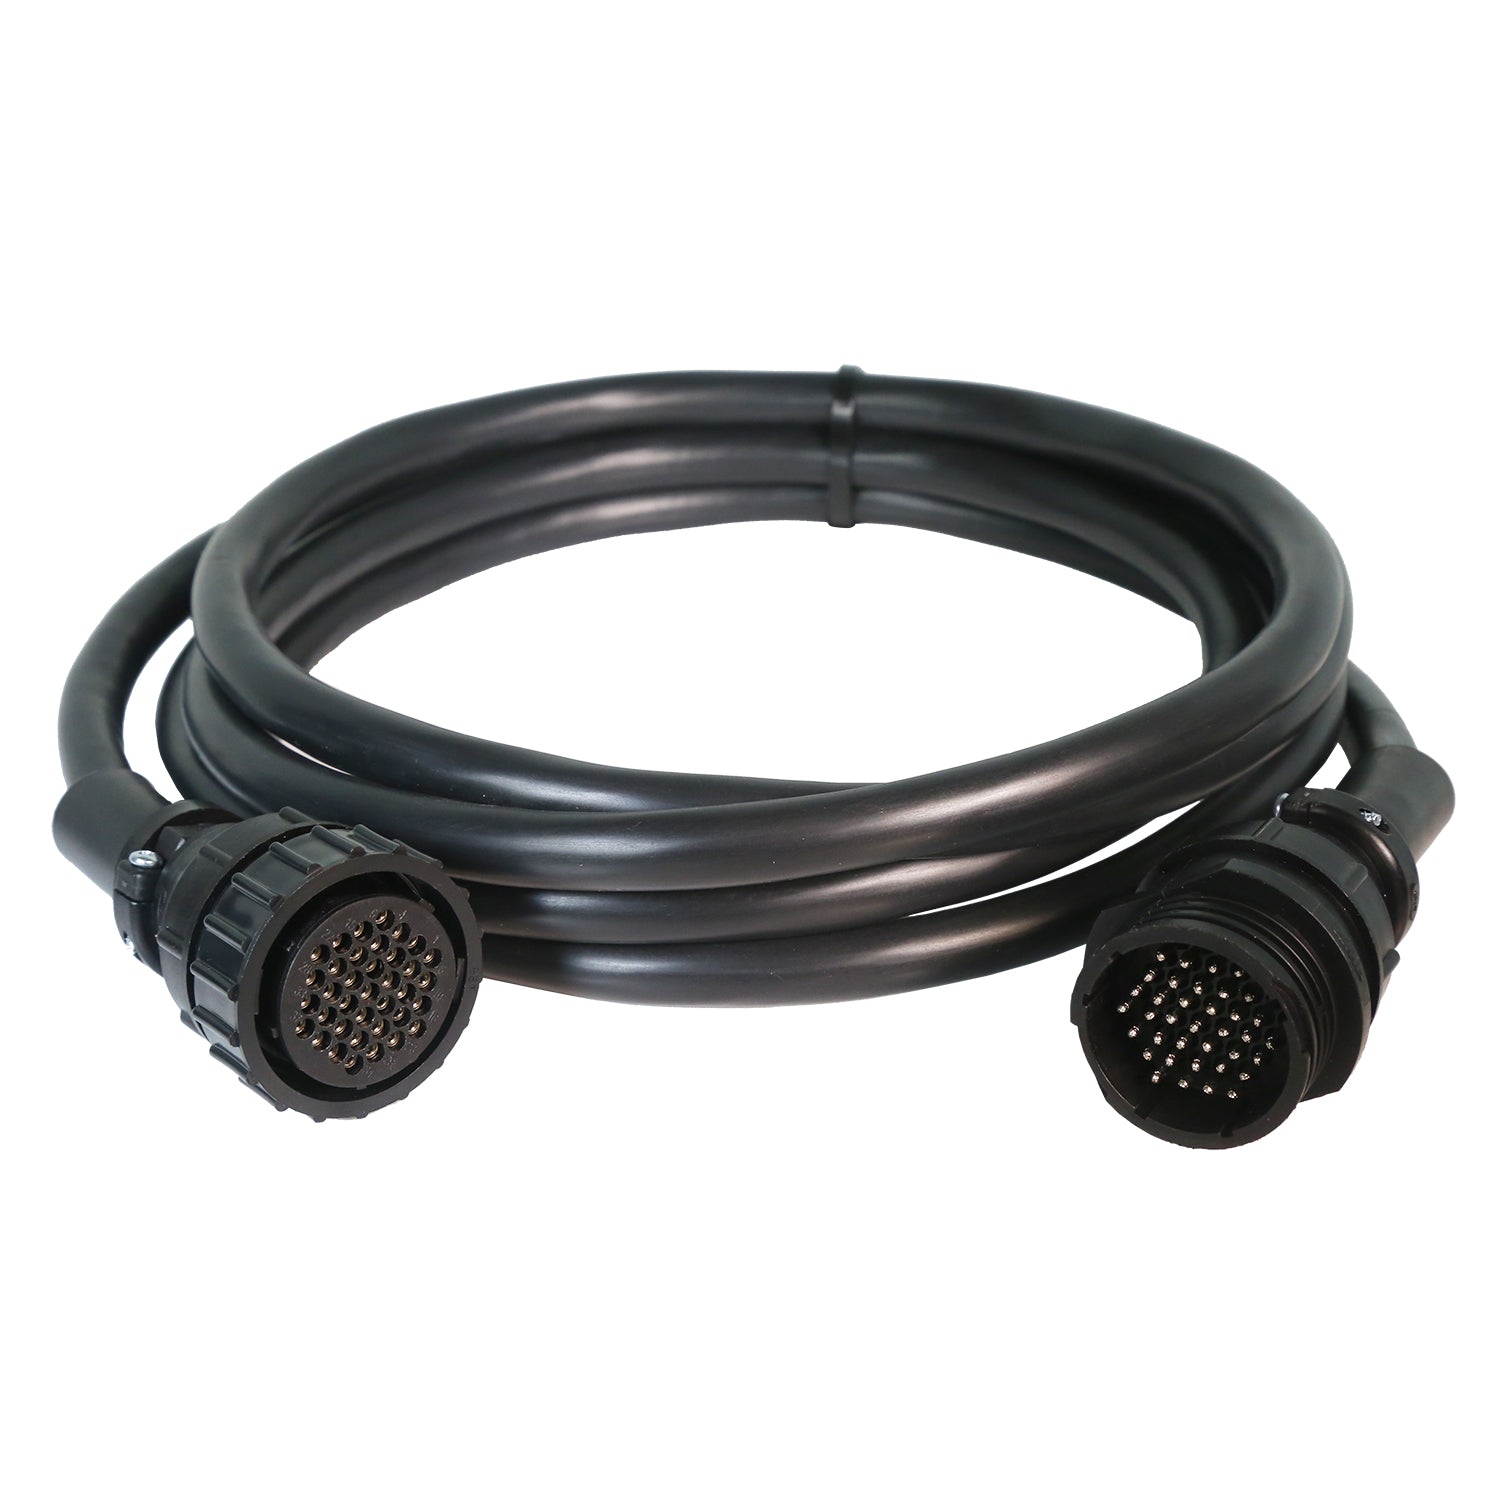 (01) 37 Pin Amp Extension Cable